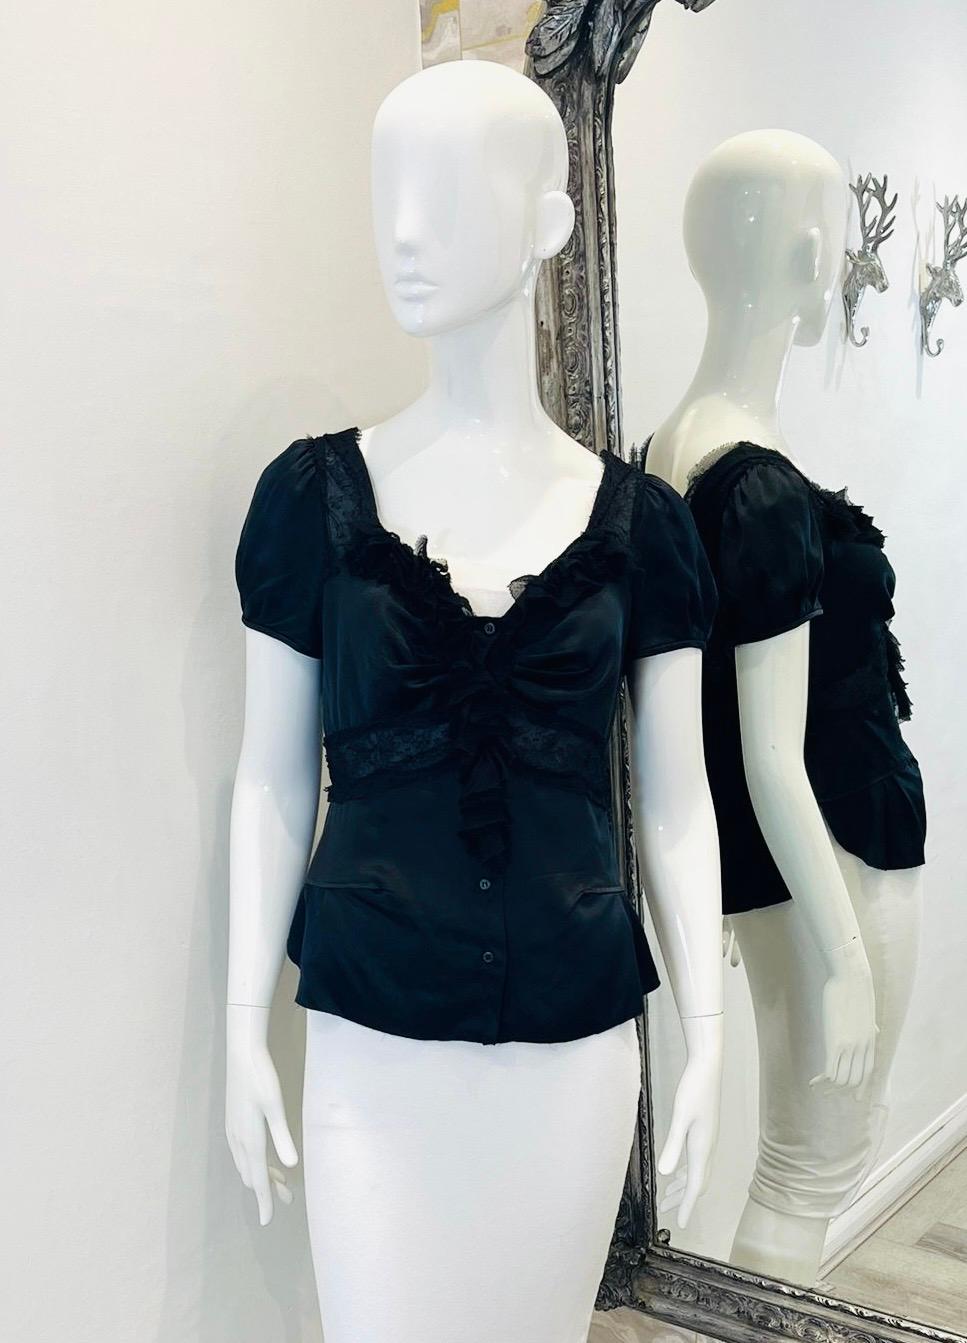 Prada Ruffle & Lace Detailed Silk Top

Black blouse designed with lace inserts and ruffle detailing.

Featuring short, balloon sleeves and drape accented V-Neck.

Styled with centre button fastening and deep, lace trimmed V-Neckline to rear.

Size –